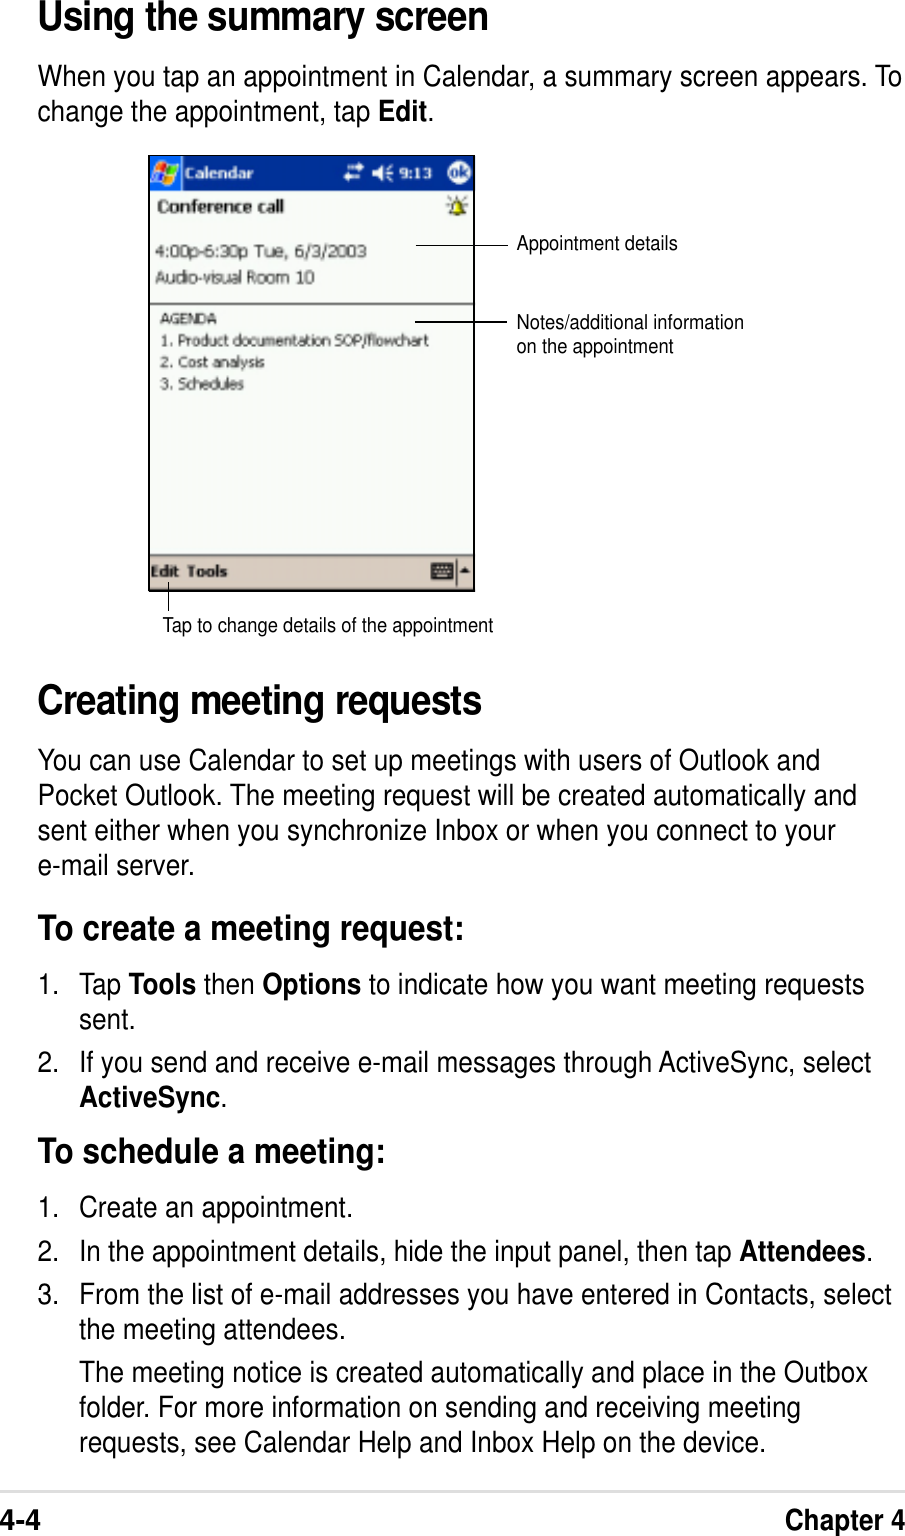 4-4Chapter 4Using the summary screenWhen you tap an appointment in Calendar, a summary screen appears. Tochange the appointment, tap Edit.Creating meeting requestsYou can use Calendar to set up meetings with users of Outlook andPocket Outlook. The meeting request will be created automatically andsent either when you synchronize Inbox or when you connect to youre-mail server.To create a meeting request:1. Tap Tools then Options to indicate how you want meeting requestssent.2. If you send and receive e-mail messages through ActiveSync, selectActiveSync.To schedule a meeting:1. Create an appointment.2. In the appointment details, hide the input panel, then tap Attendees.3. From the list of e-mail addresses you have entered in Contacts, selectthe meeting attendees.The meeting notice is created automatically and place in the Outboxfolder. For more information on sending and receiving meetingrequests, see Calendar Help and Inbox Help on the device.Appointment detailsNotes/additional informationon the appointmentTap to change details of the appointment